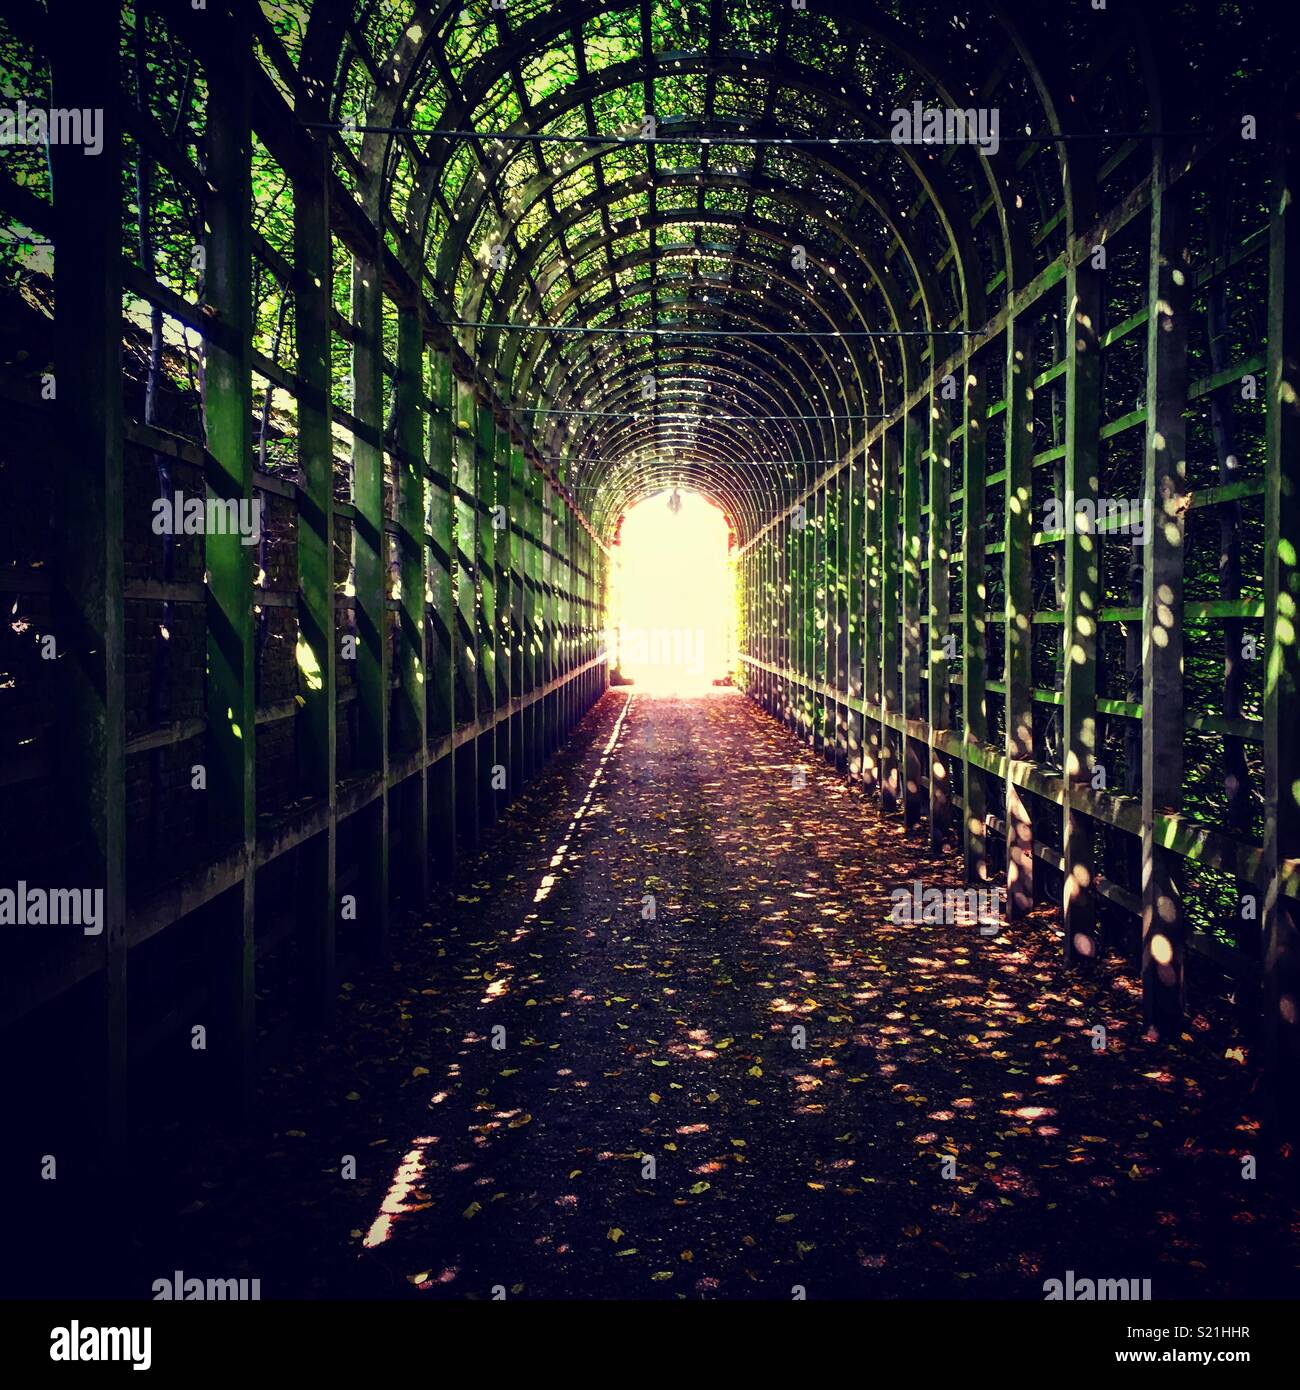 Light at the end of the tunnel Stock Photo